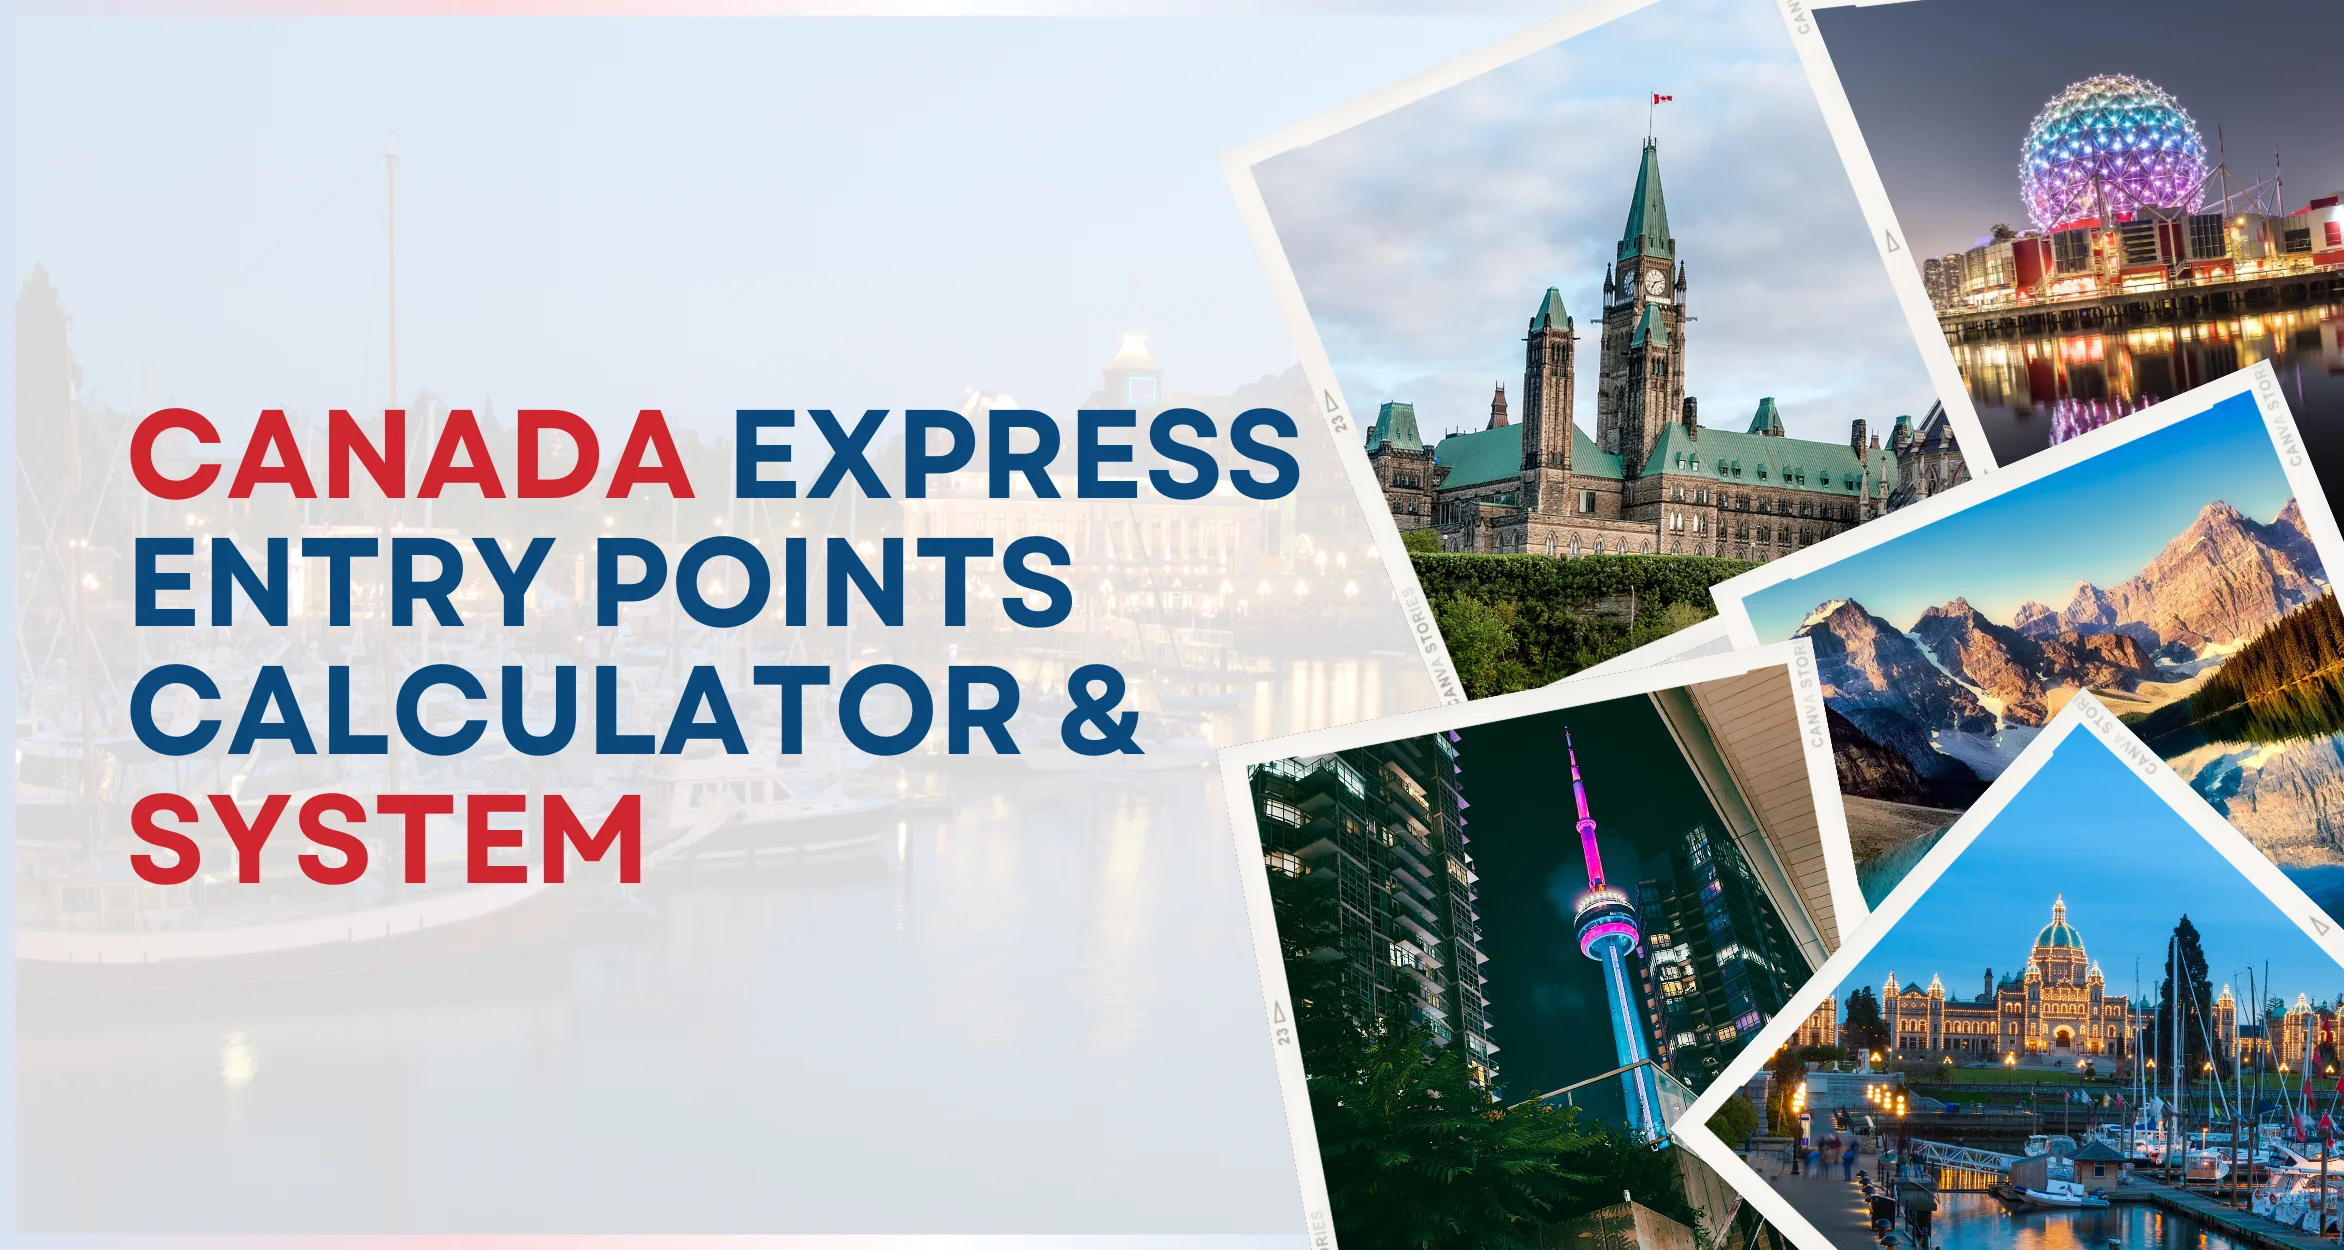 Canada express entry points calculator & System